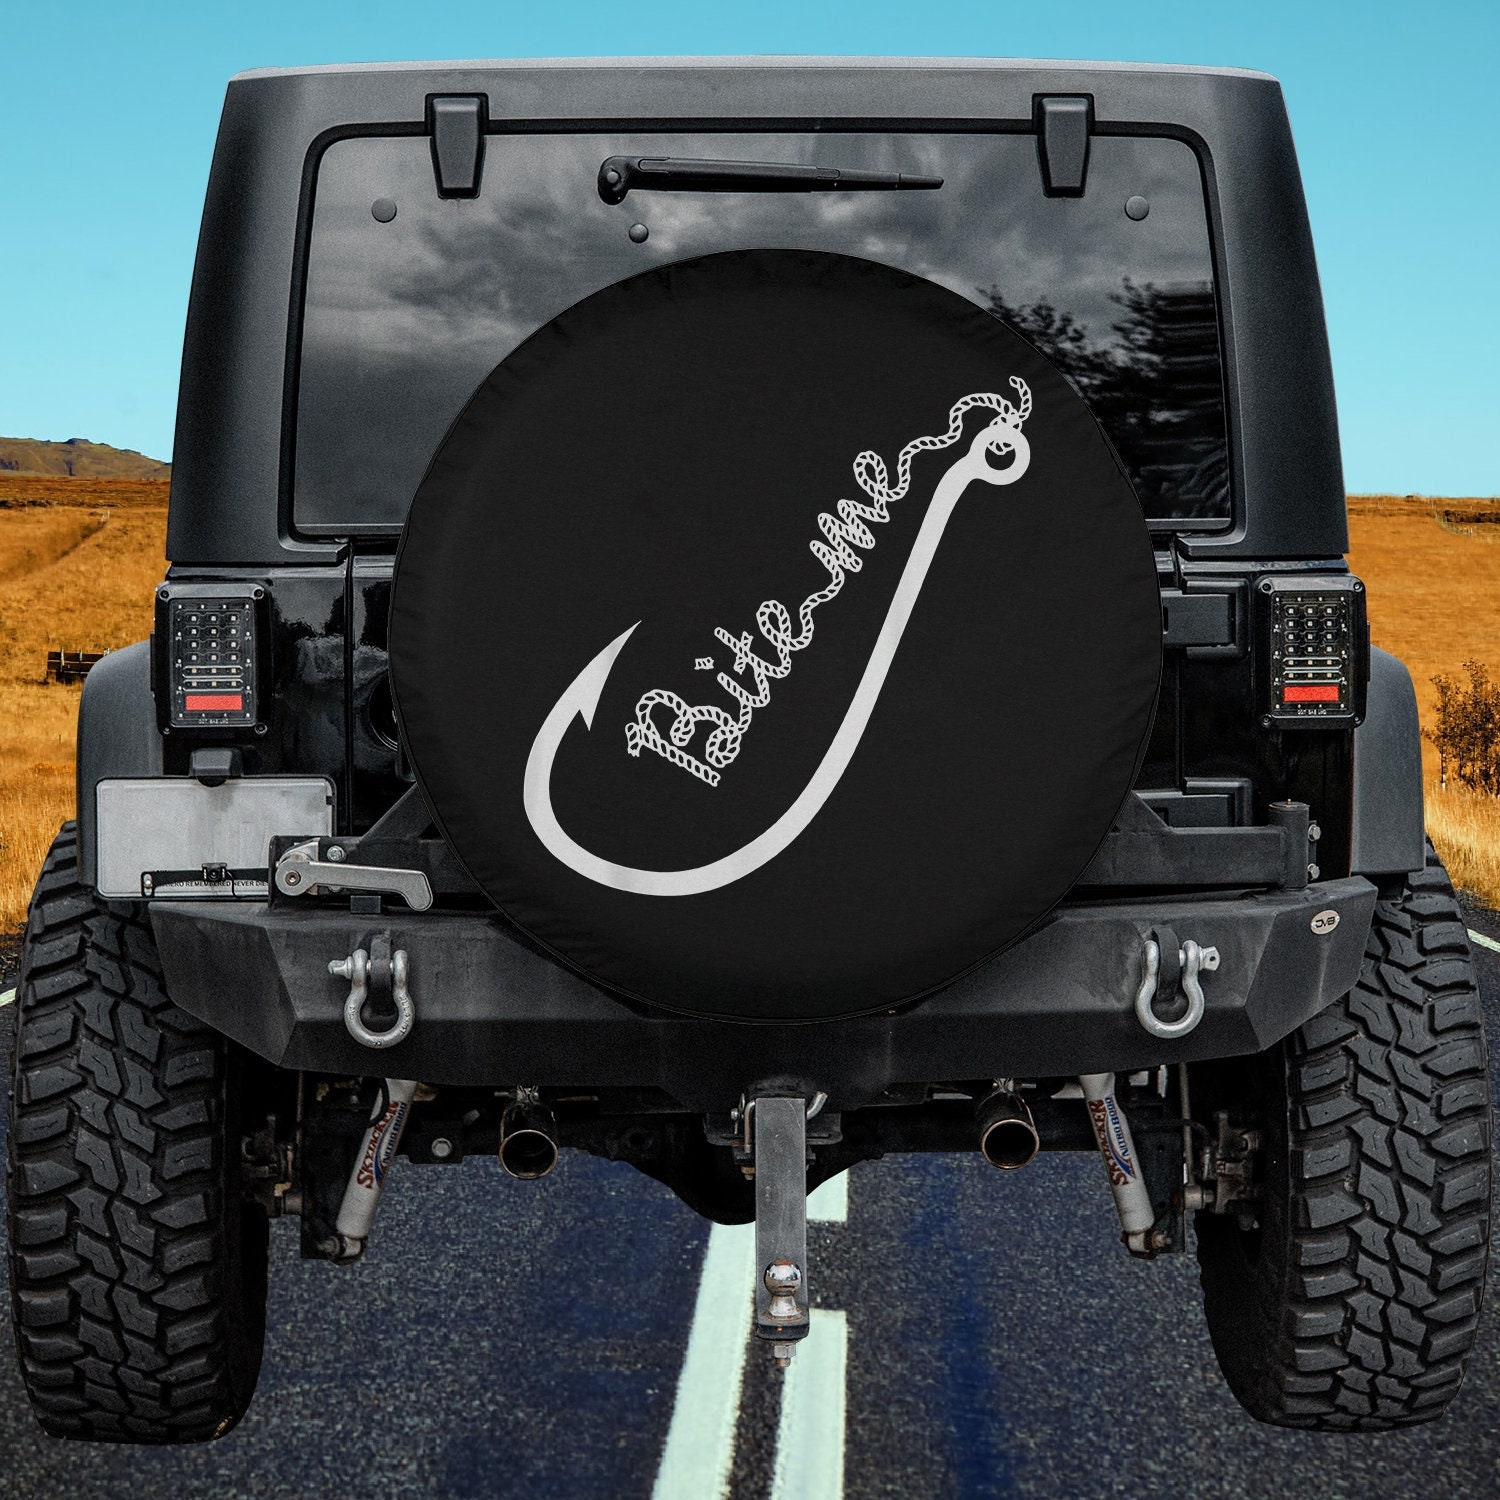 Bite Me Spare Tire Cover - Funny Angling Fishing Spare Tire Cover